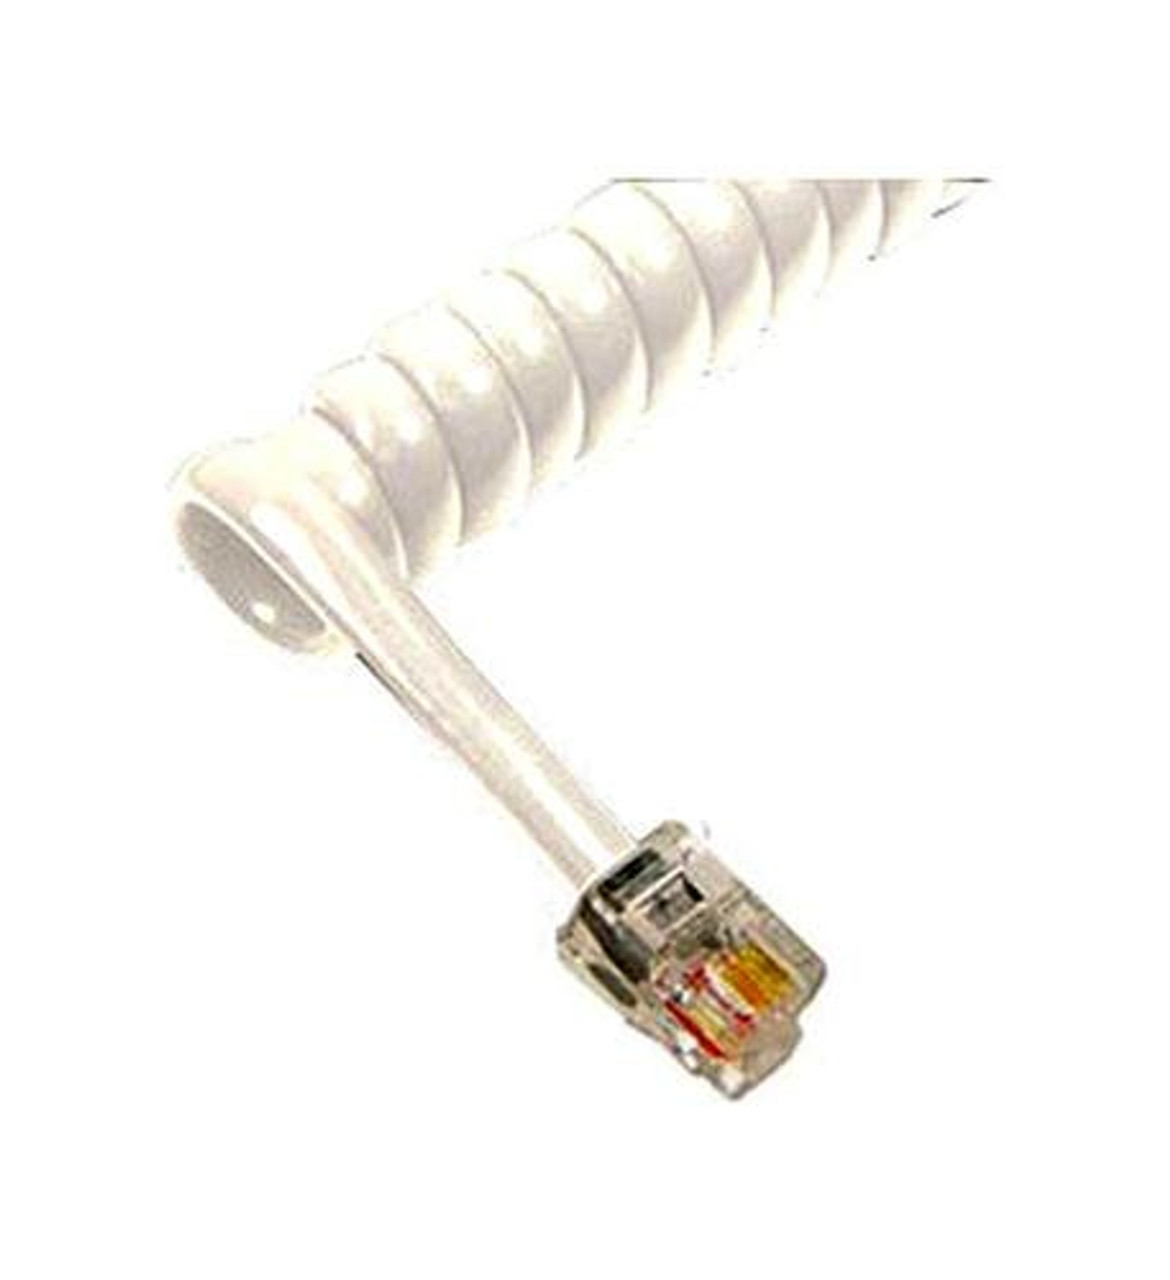 Cablesys Coiled Telephone Handset Cord for Use with PBX Phone Systems, VoIP Telephones - 6 Ft Uncoiled, Rj22, 1.5 Inch Lead on Both Ends, White